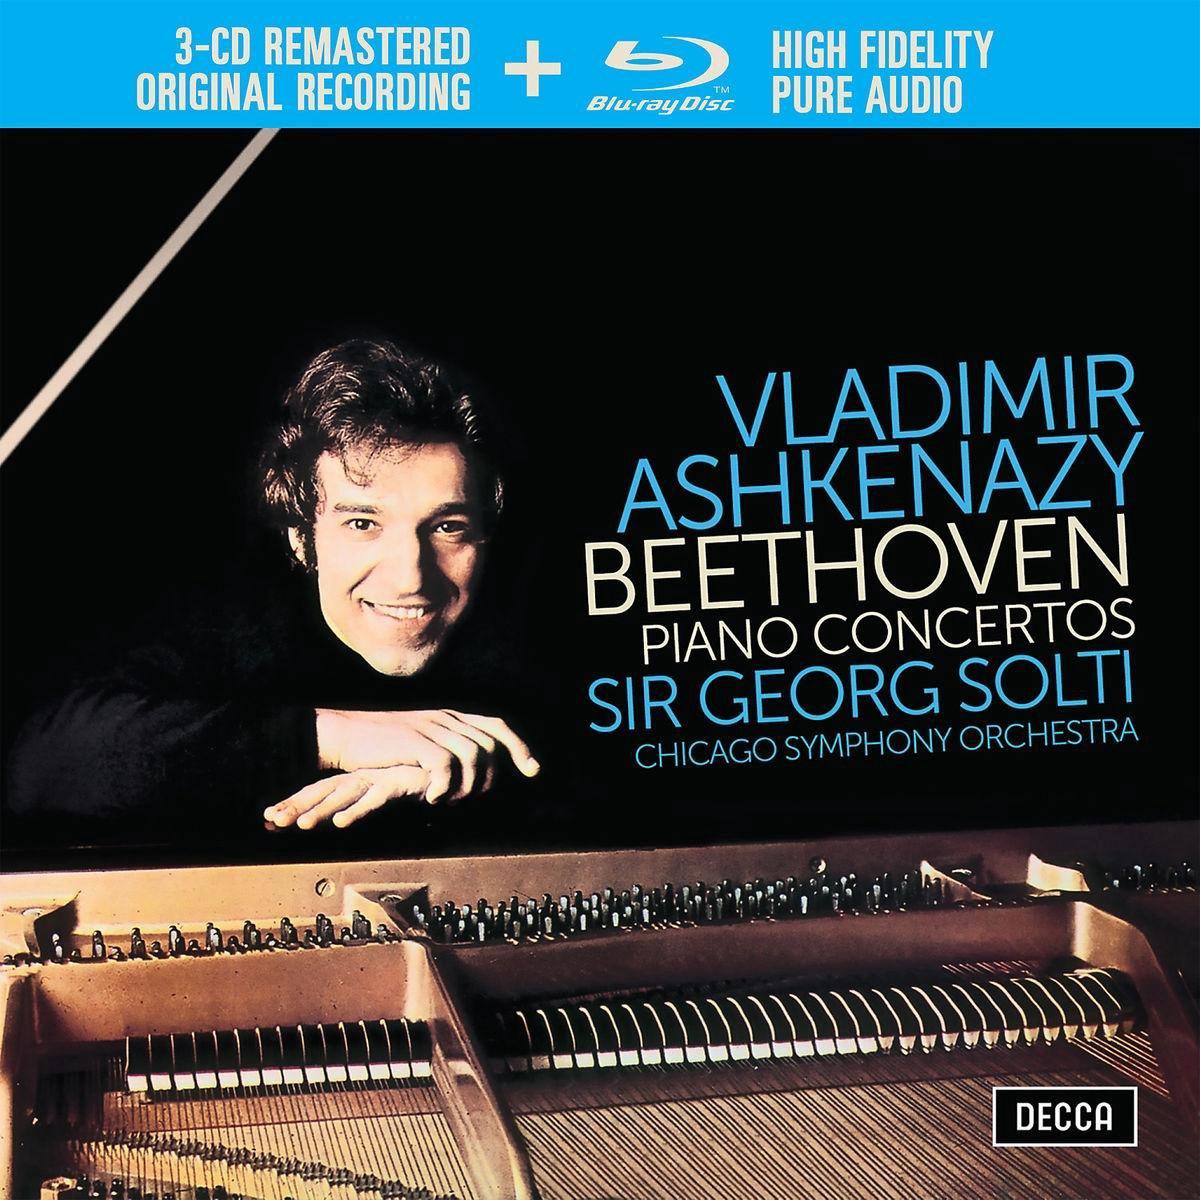 Beethoven: The Piano Concertos (Limited Edition) - 3 CD + Audio Blu-Ray Disc | Ludwig Van Beethoven, Vladimir Ashkenazy, Georg Solti, Chicago Symphony Orchestra